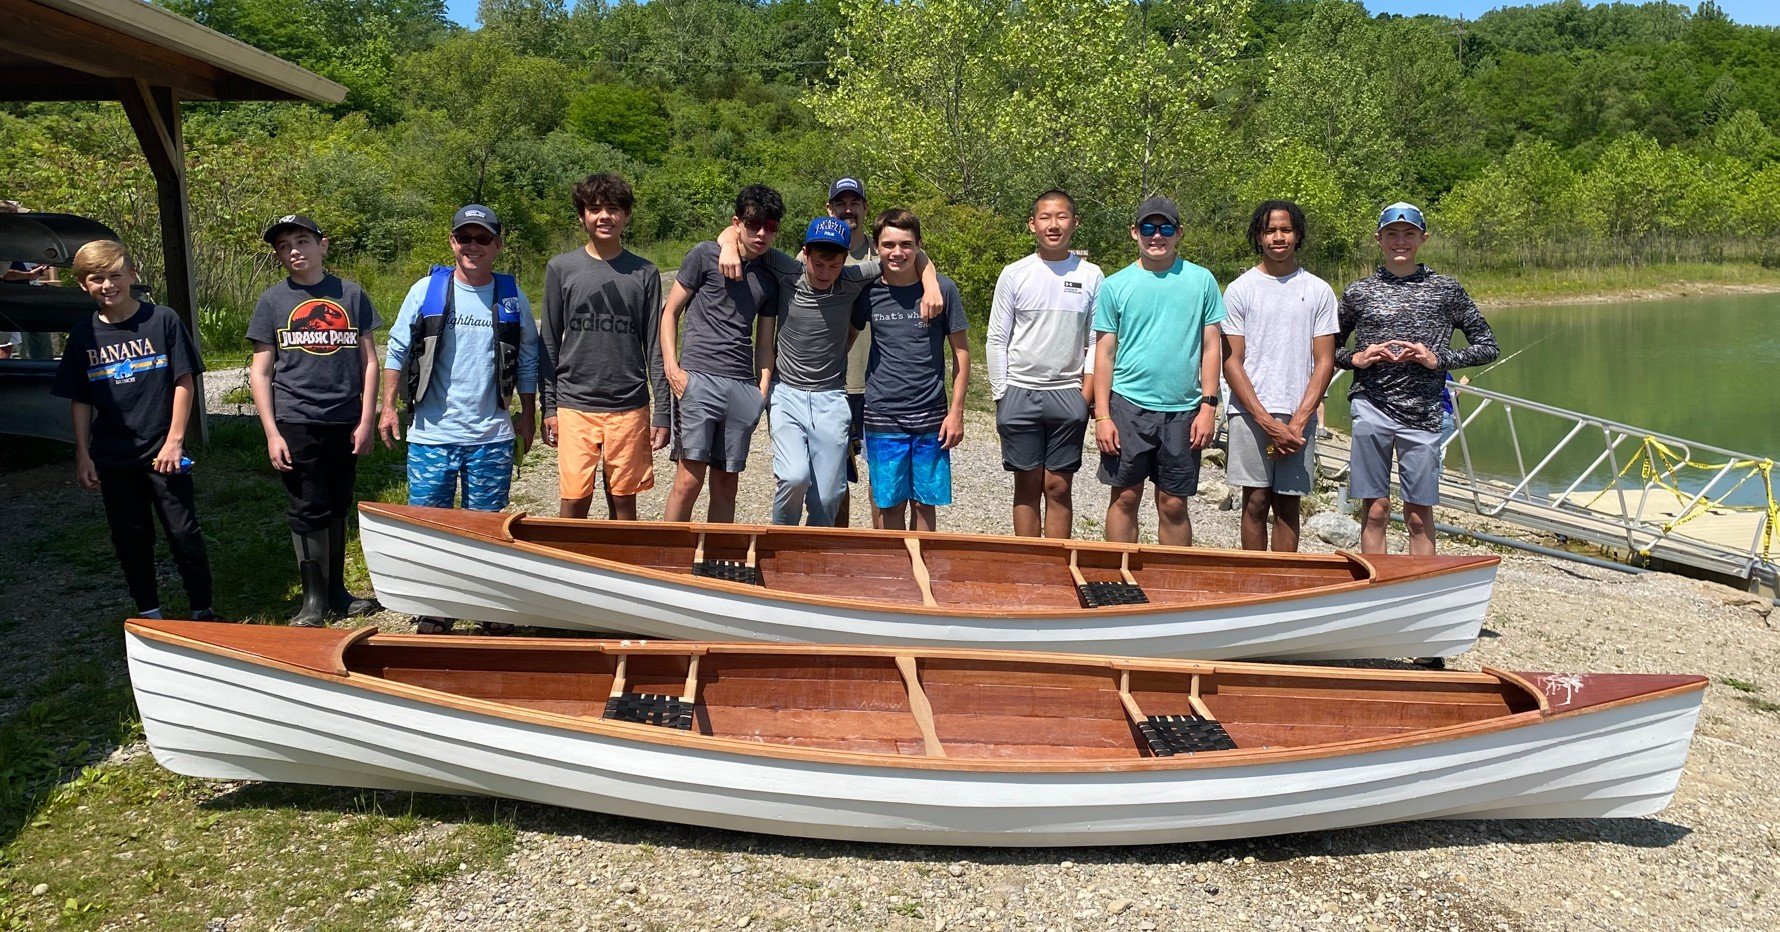 New raffle: A canoe handmade by students!
💪🛶
Be the lucky owner of a handmade 14-foot lapstrake style canoe made out of mahogany by students at Cincinnati Country Day.

Over a week, @cincinnaticountrydayschool middle school students worked together